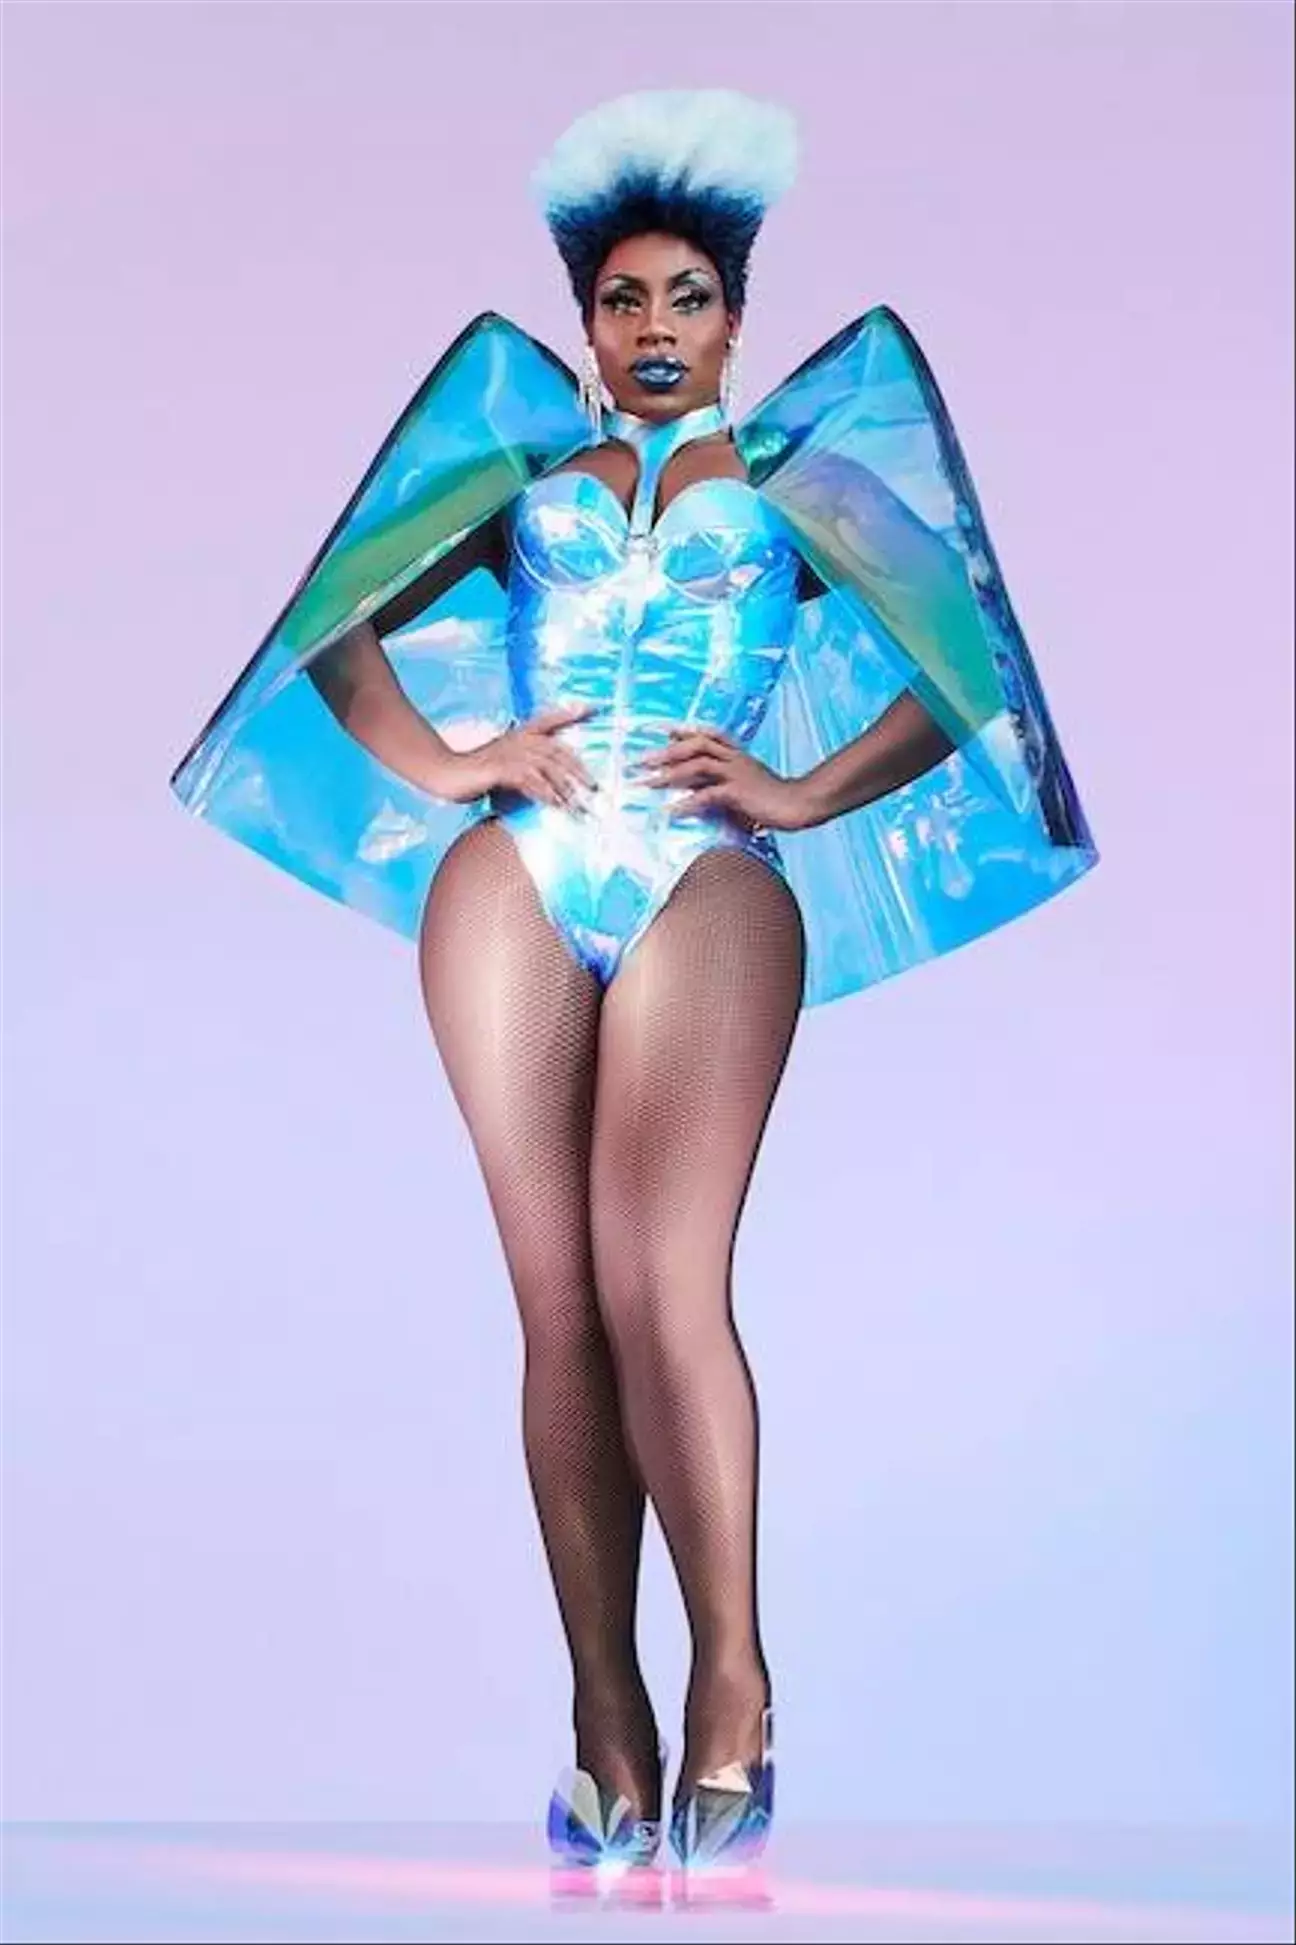 Monet X Change is from season 10 of the regular version of the US show (